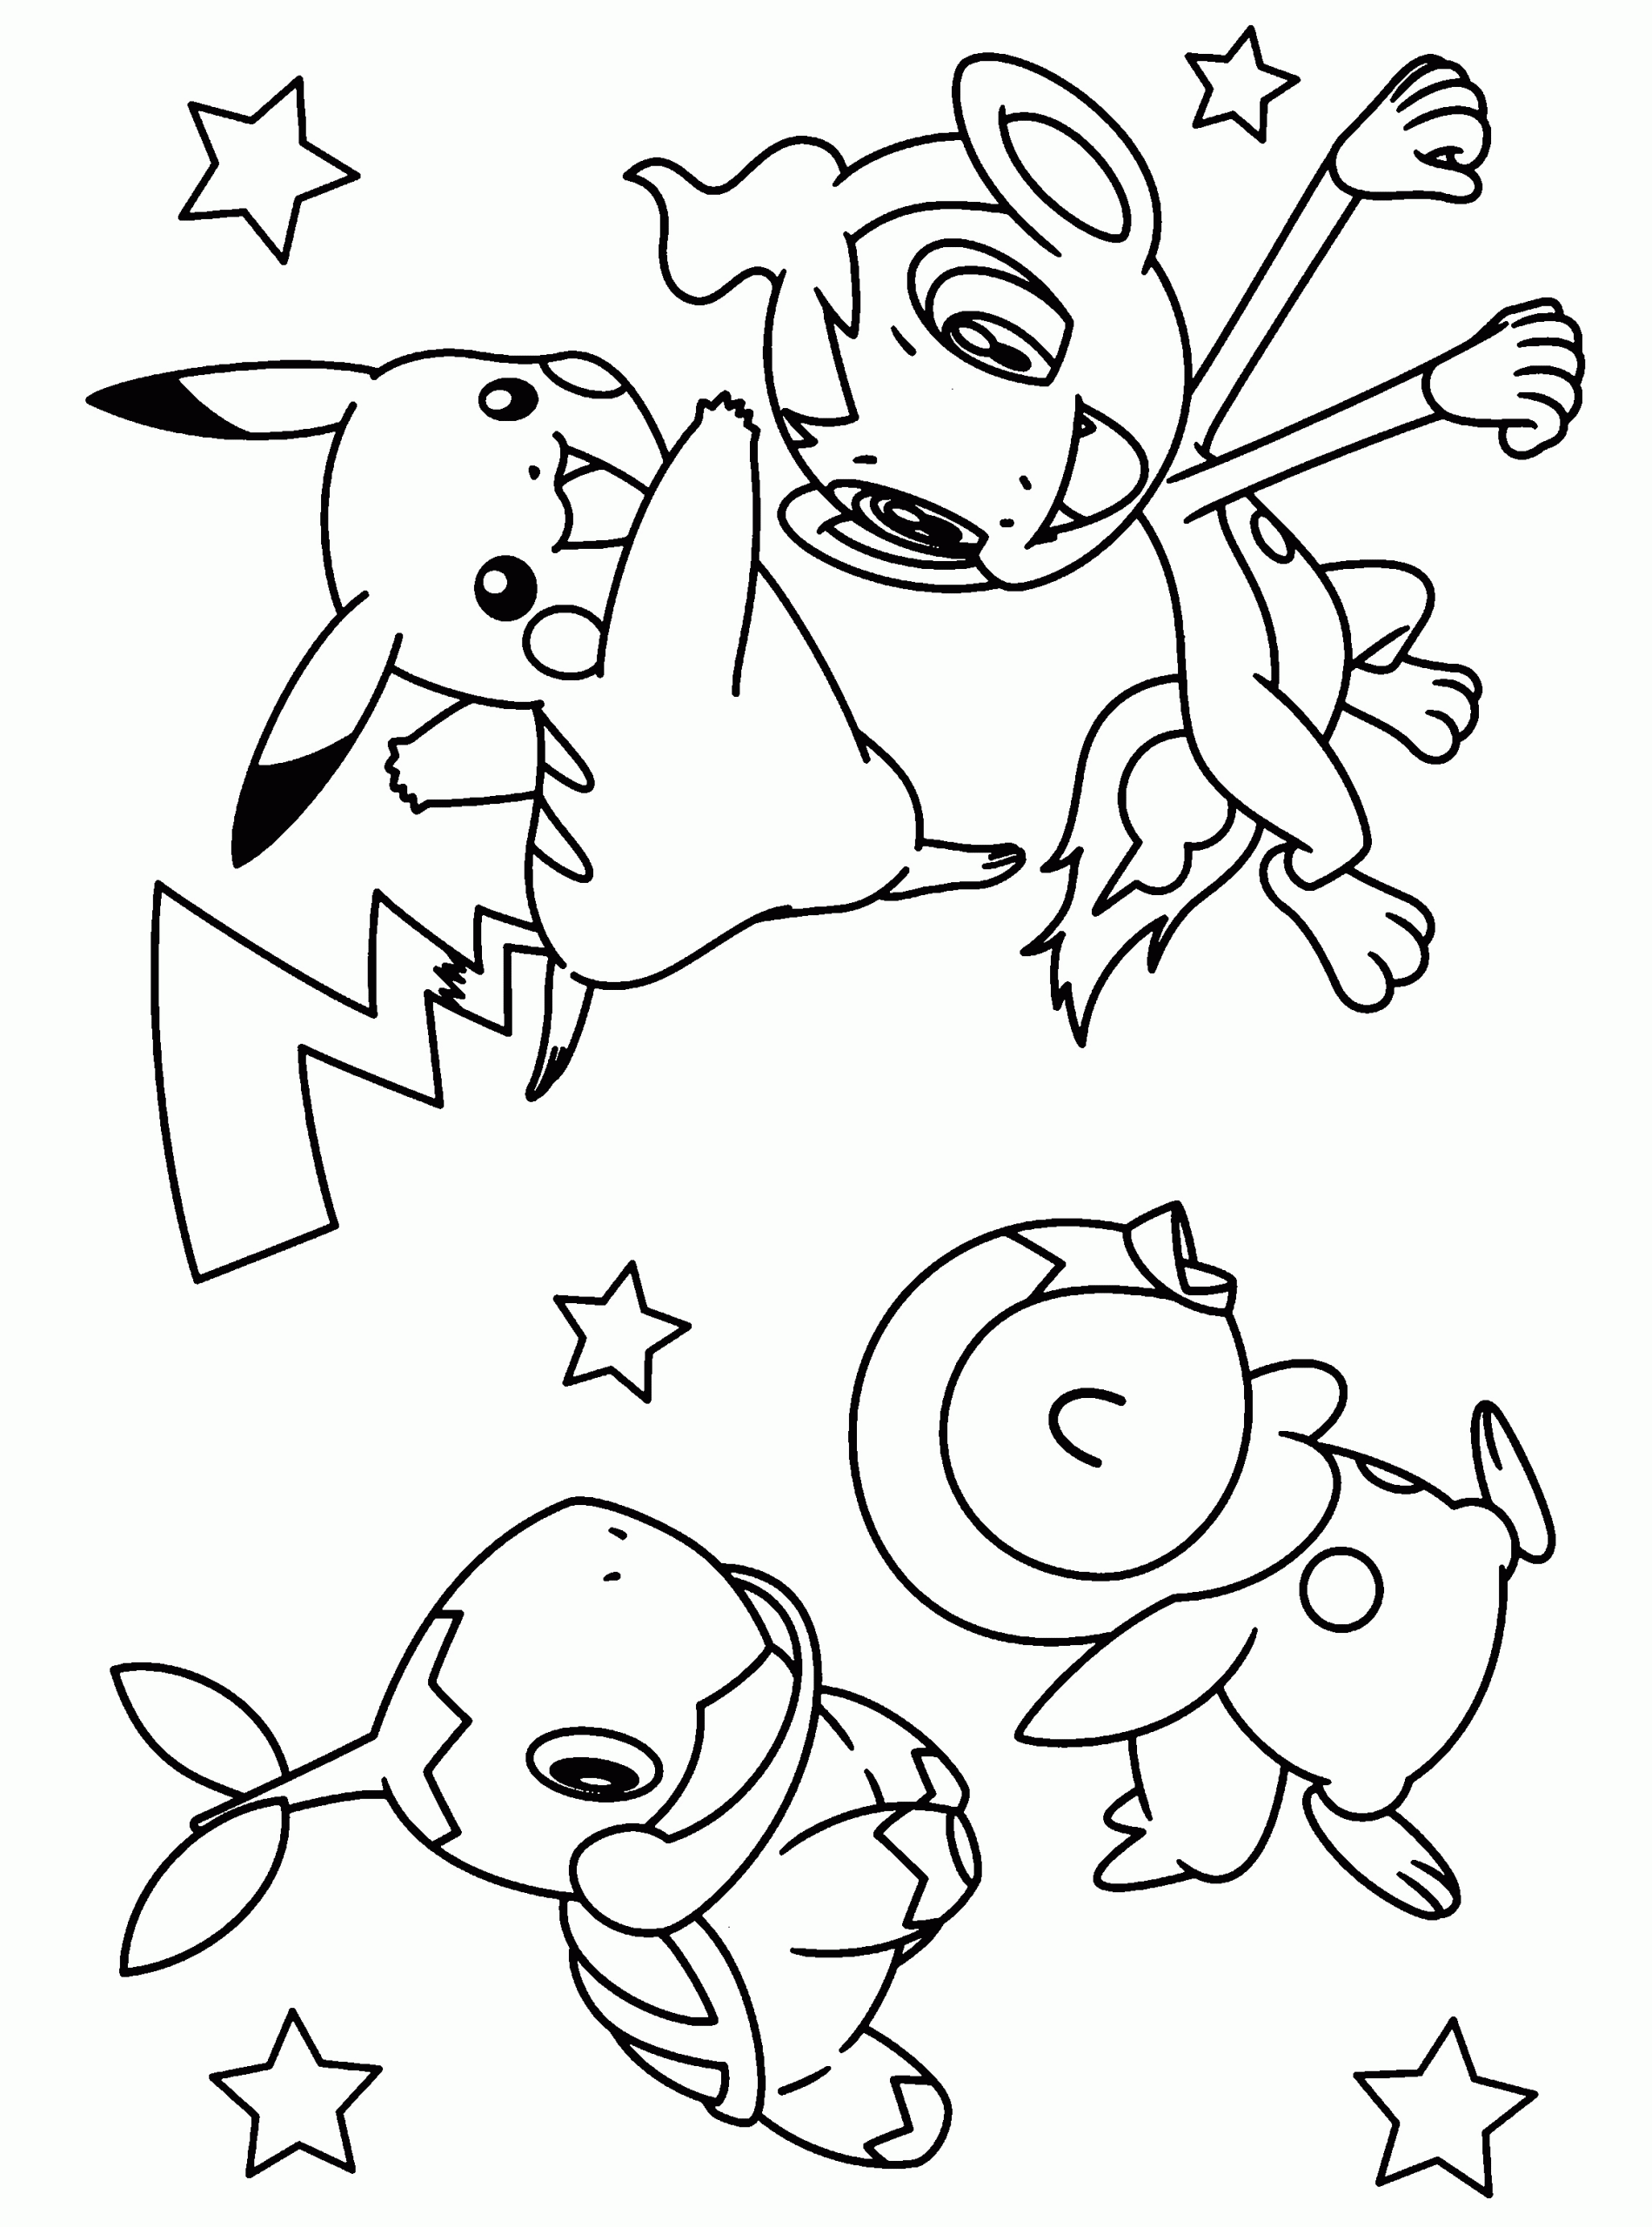 Coloring Pages For Kids Pokemon
 55 Pokemon Coloring Pages For Kids